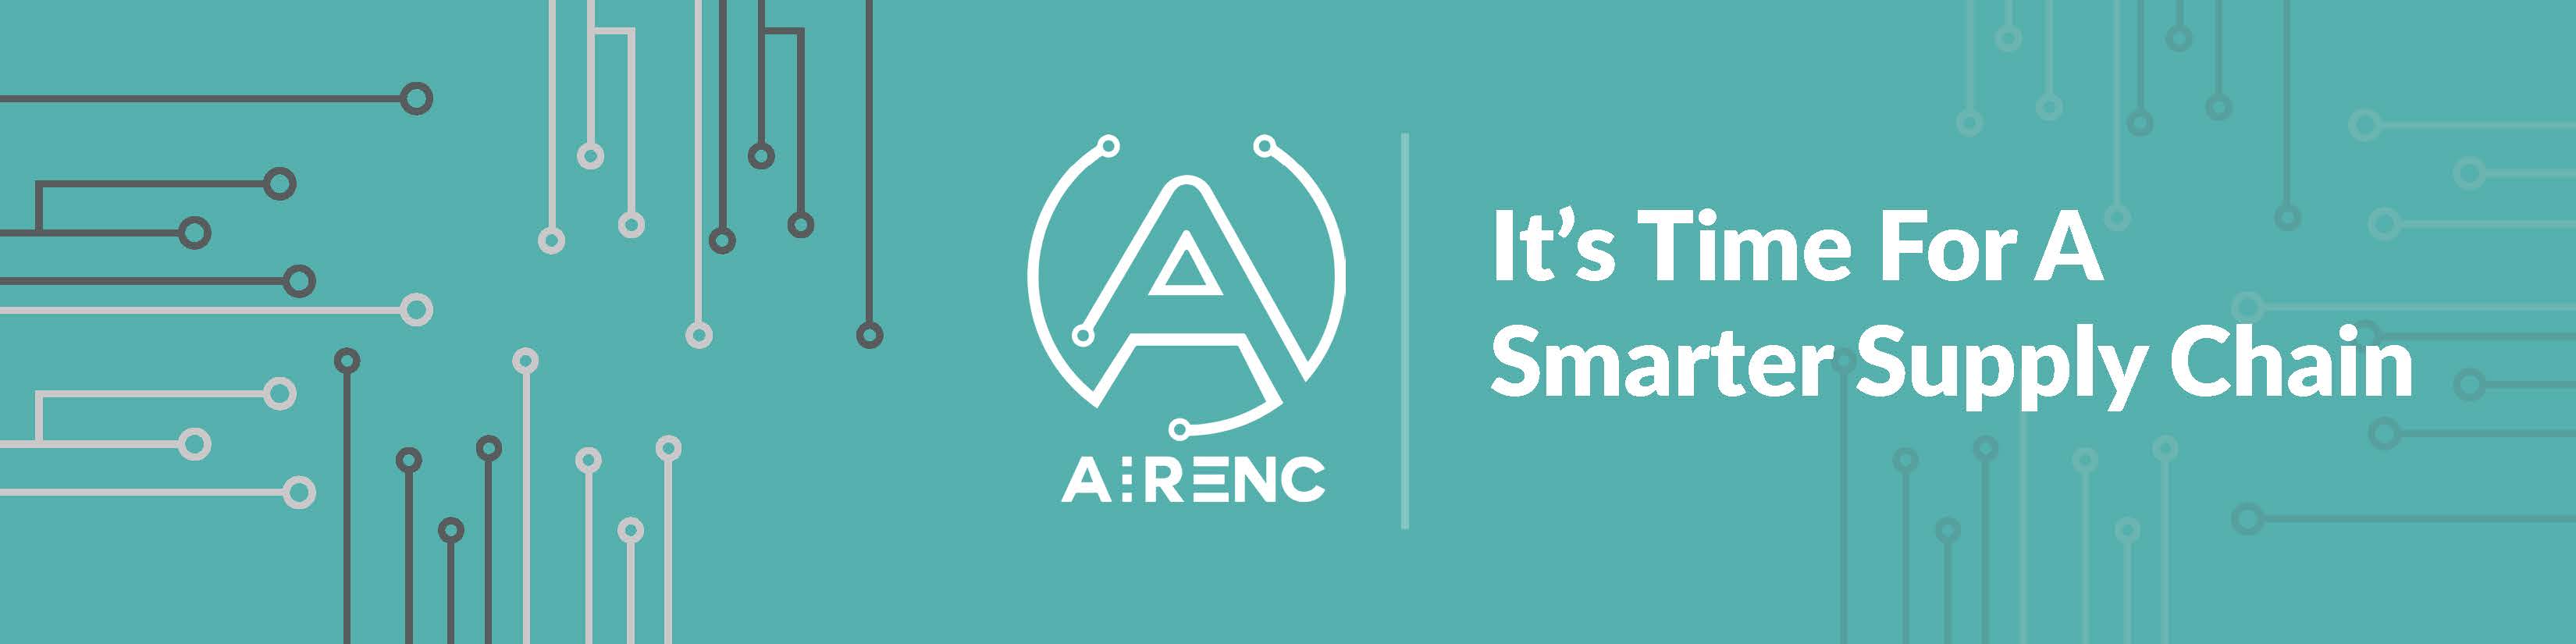 Airenc